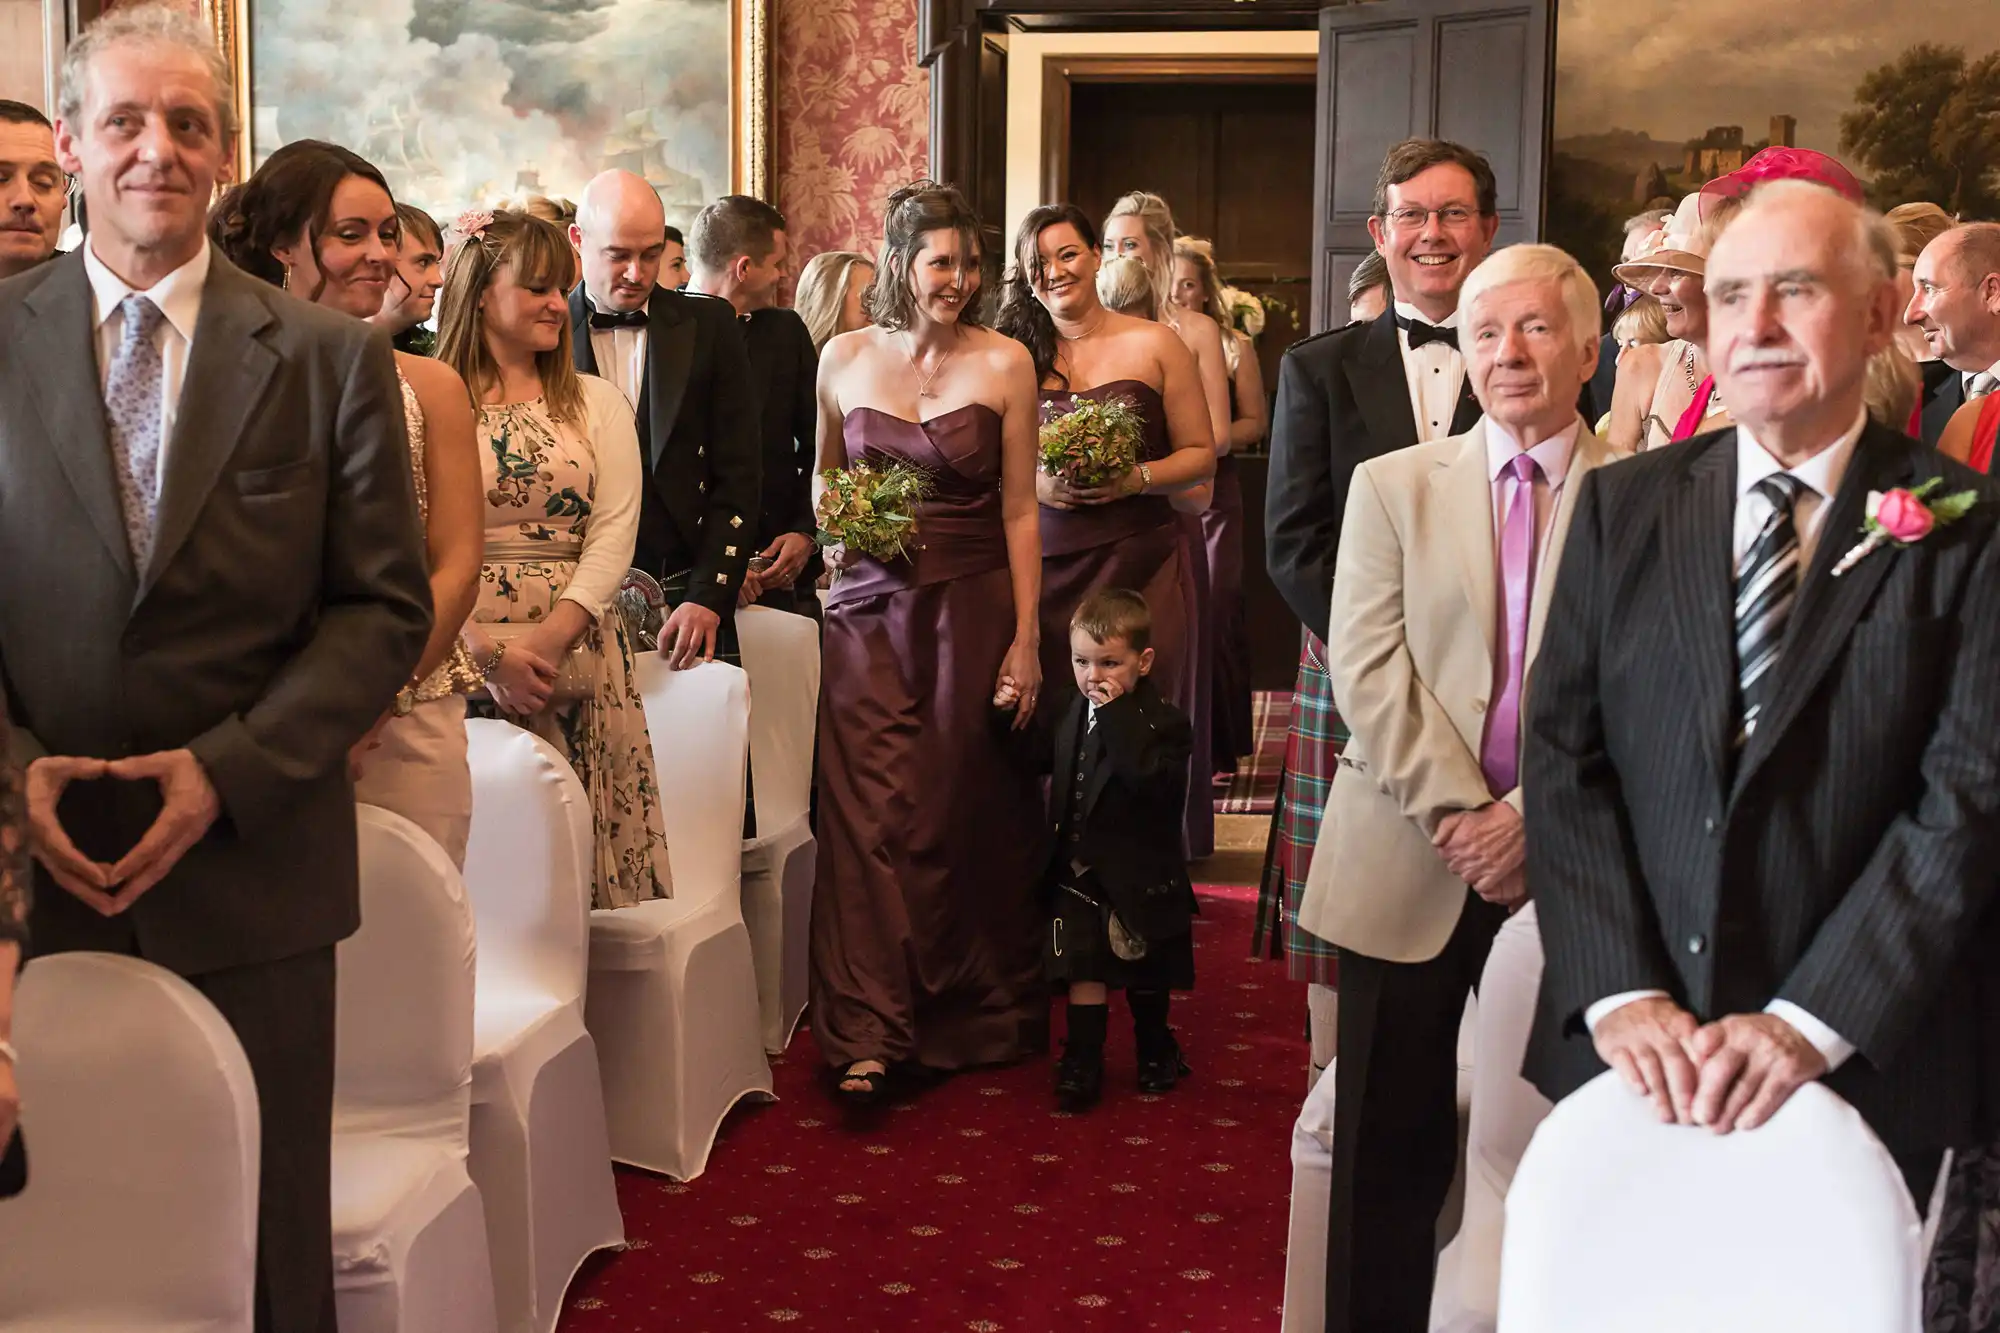 Guests smiling and watching as a bride walks down the aisle at a wedding ceremony, with a young boy in a kilt looking shyly towards the ground.